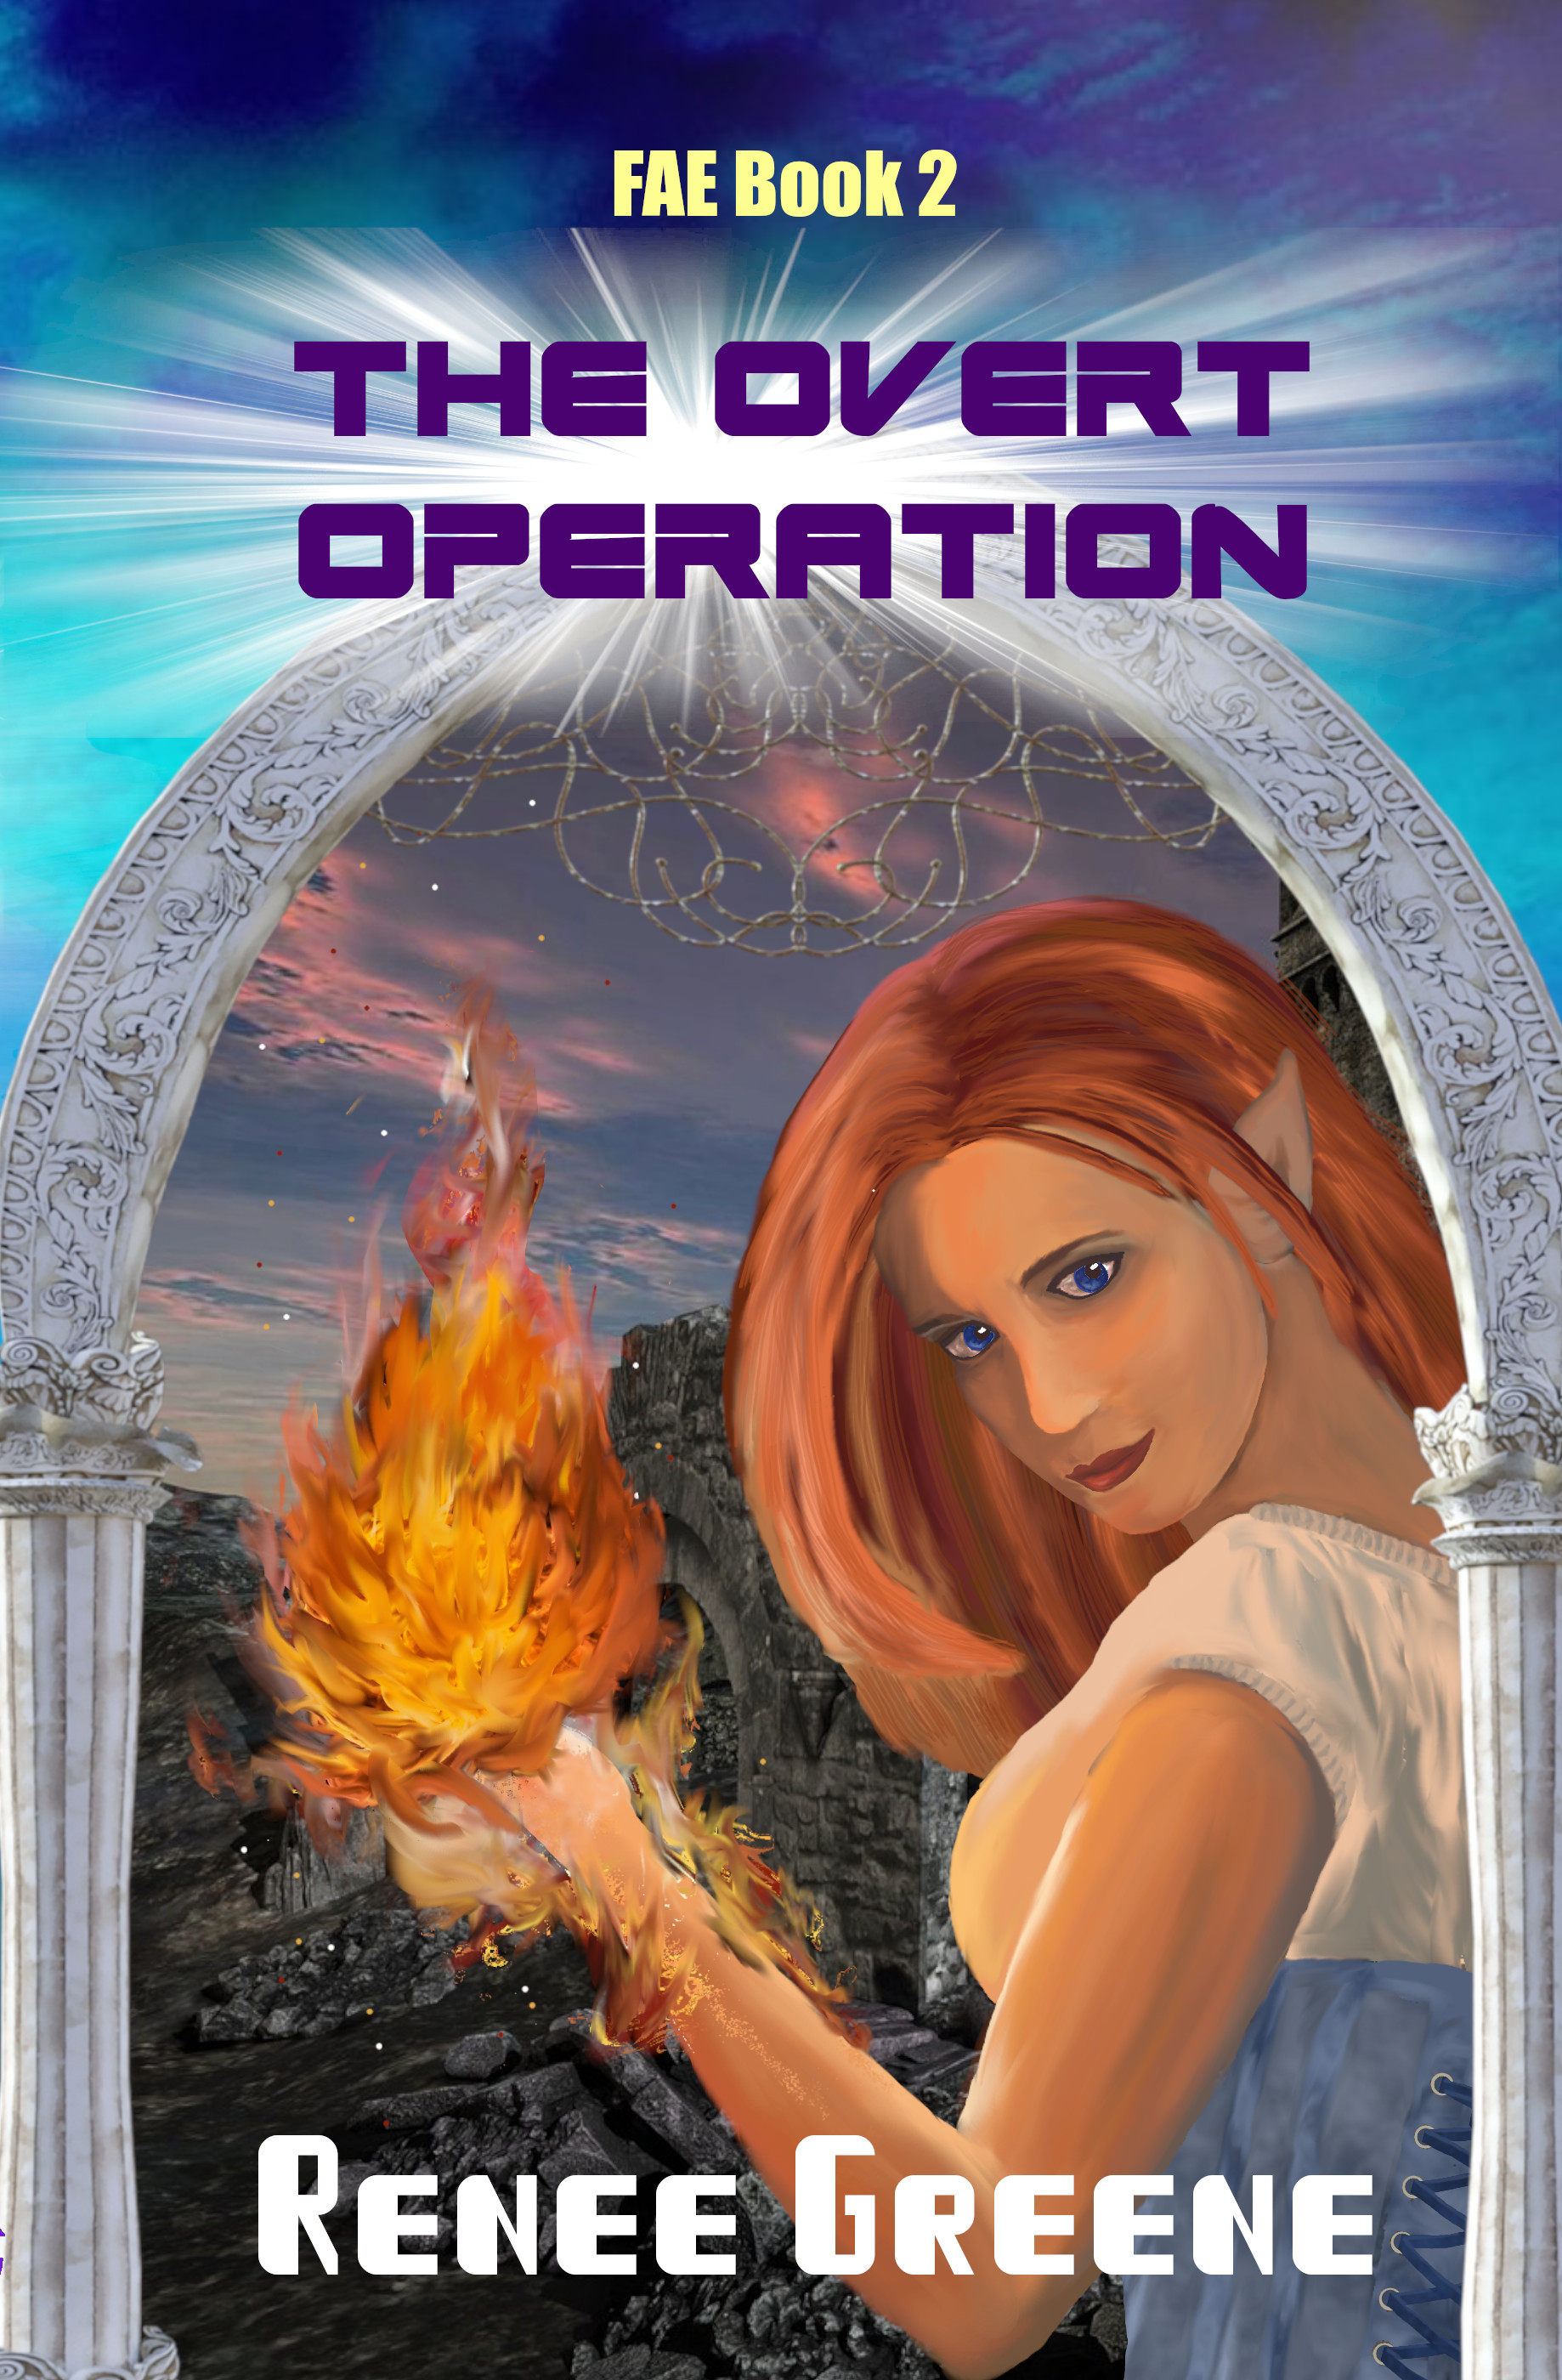 FAE Book 2: The Overt Operation